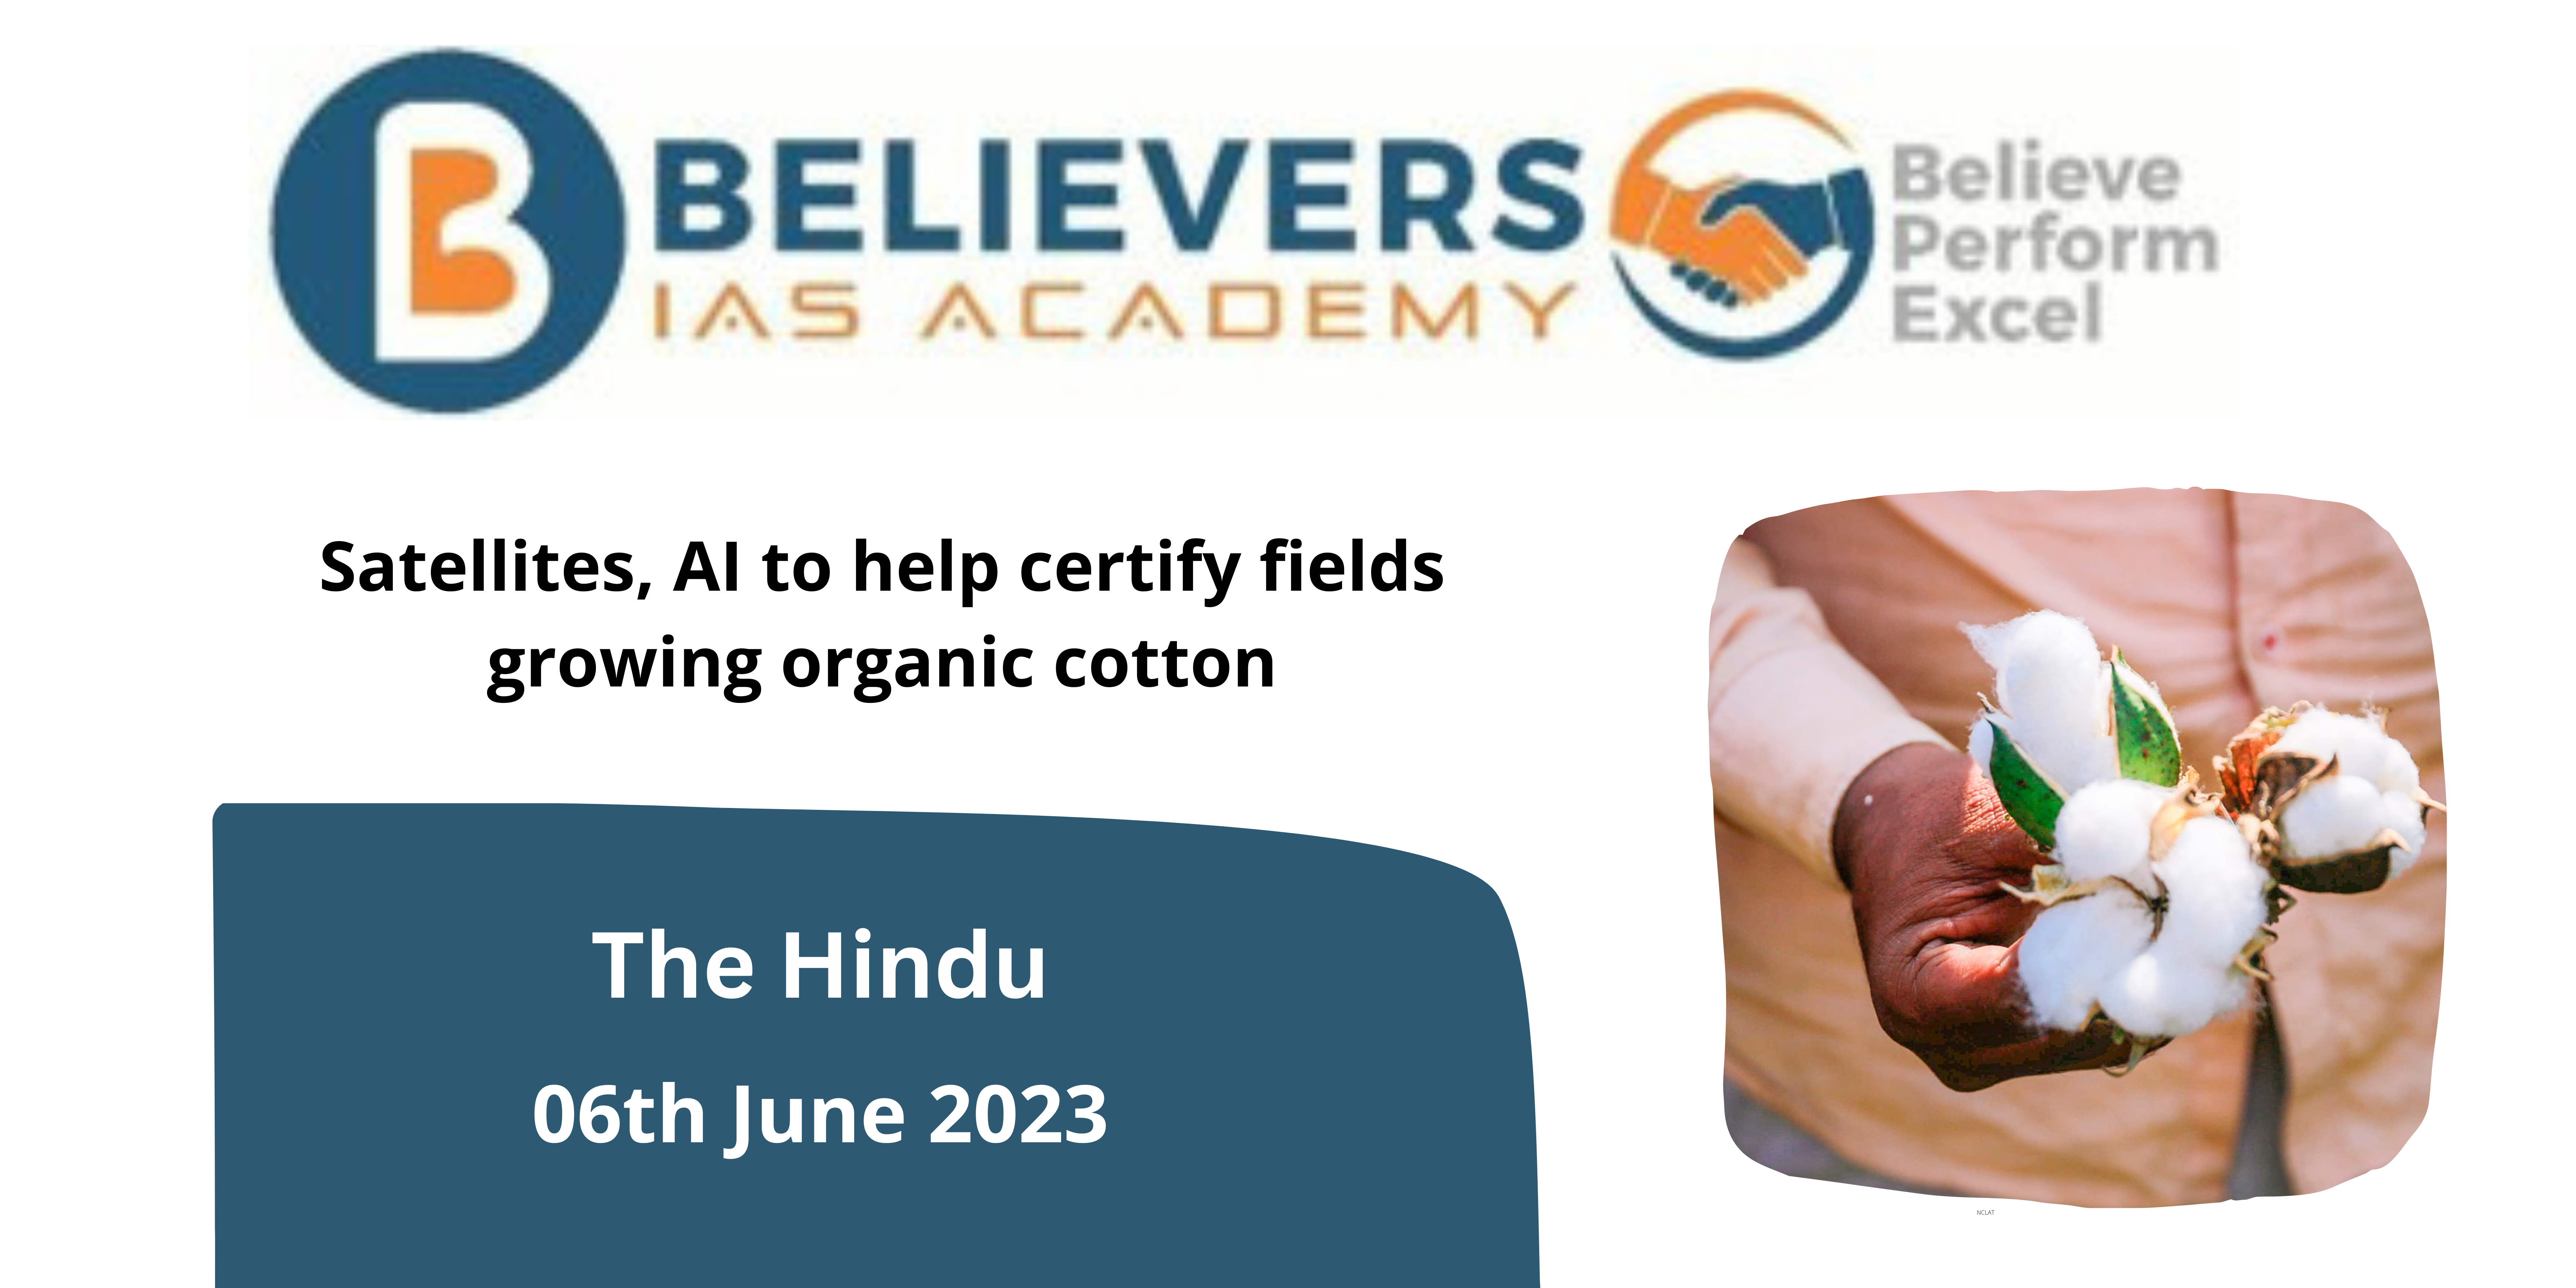 Satellites, AI to help certify fields growing organic cotton